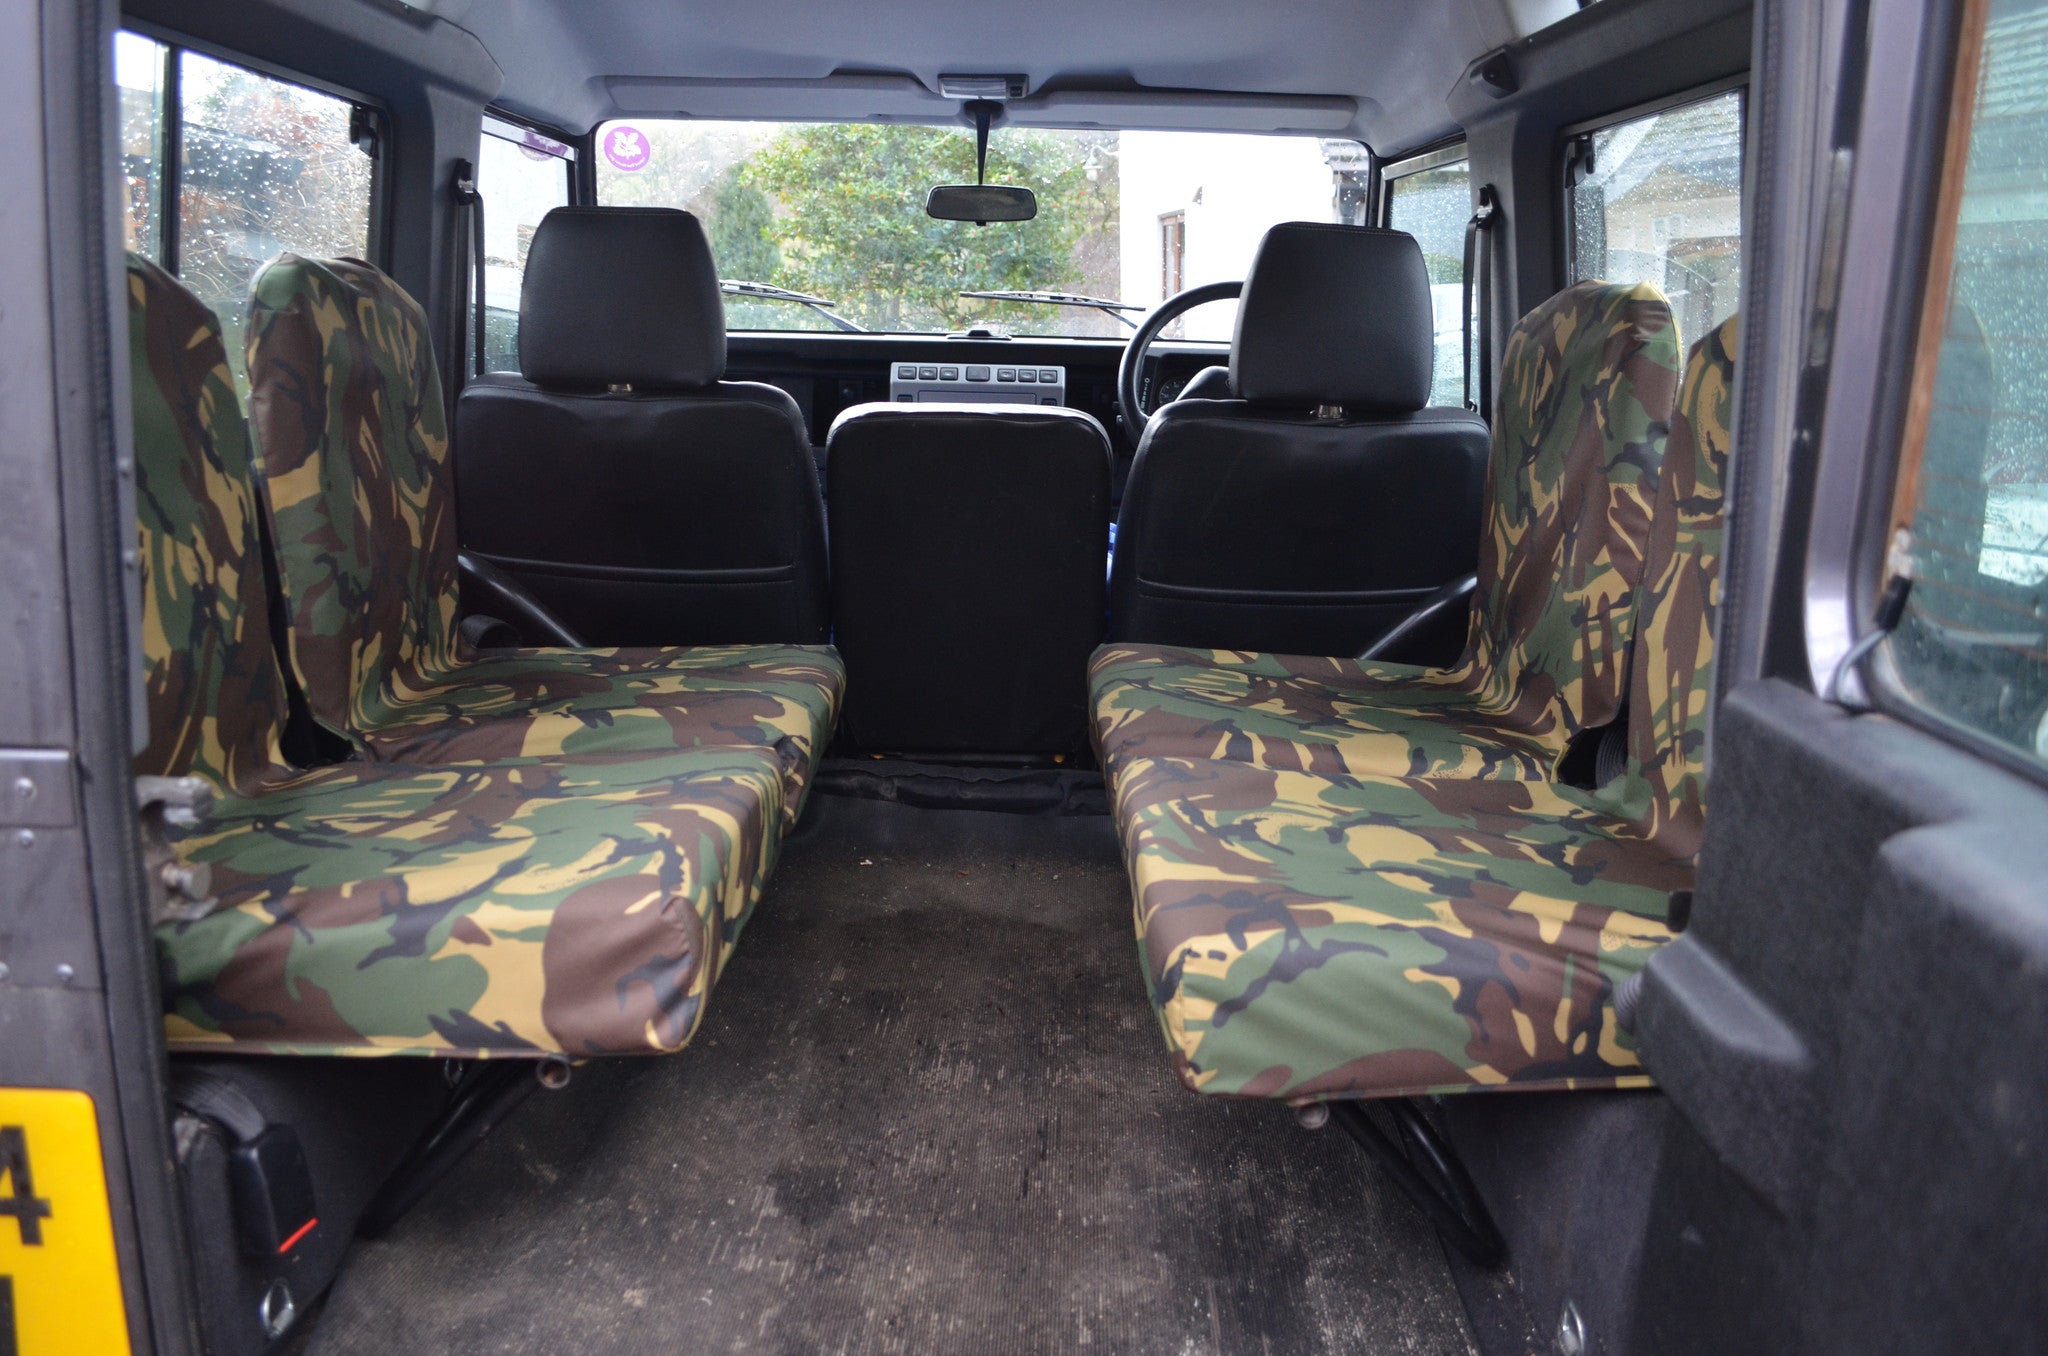 Land Rover Defender 1983 - 2007 Rear Seat Covers Set of 4 Dicky Seats / Green Camouflage Turtle Covers Ltd